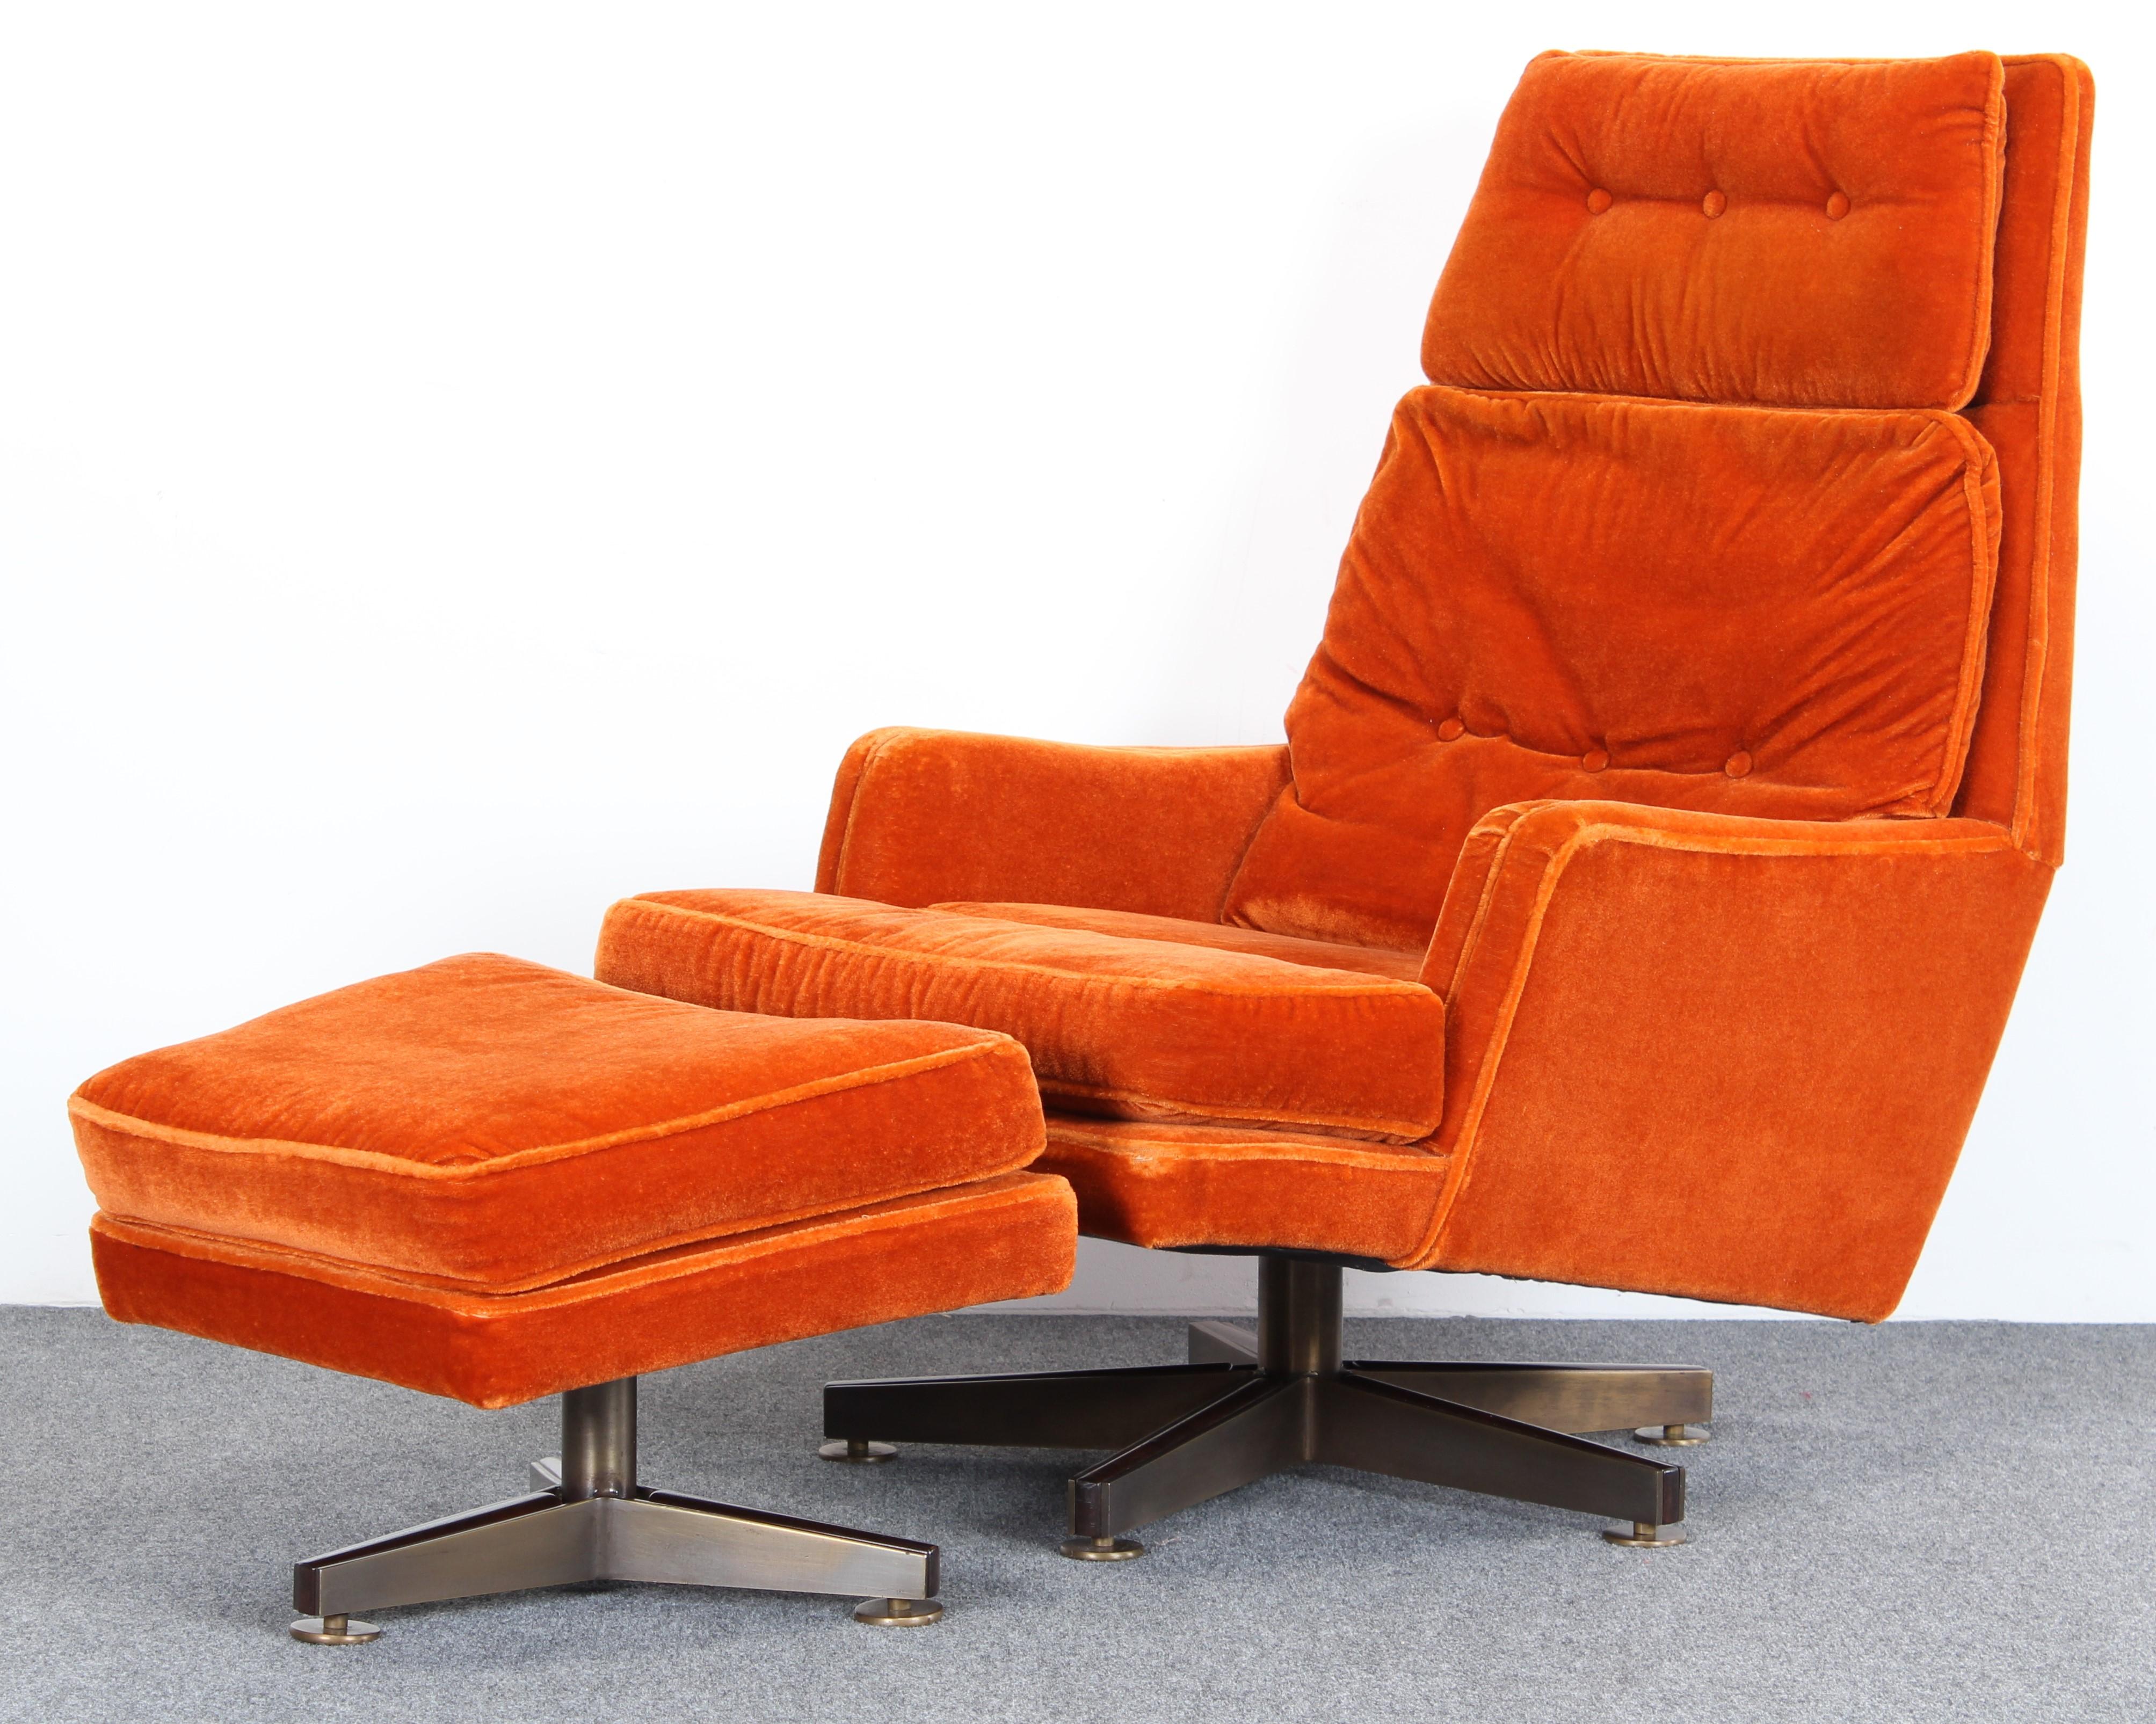 American Edward Wormley Swivel Lounge Chair and Ottoman for Dunbar, 1960 For Sale